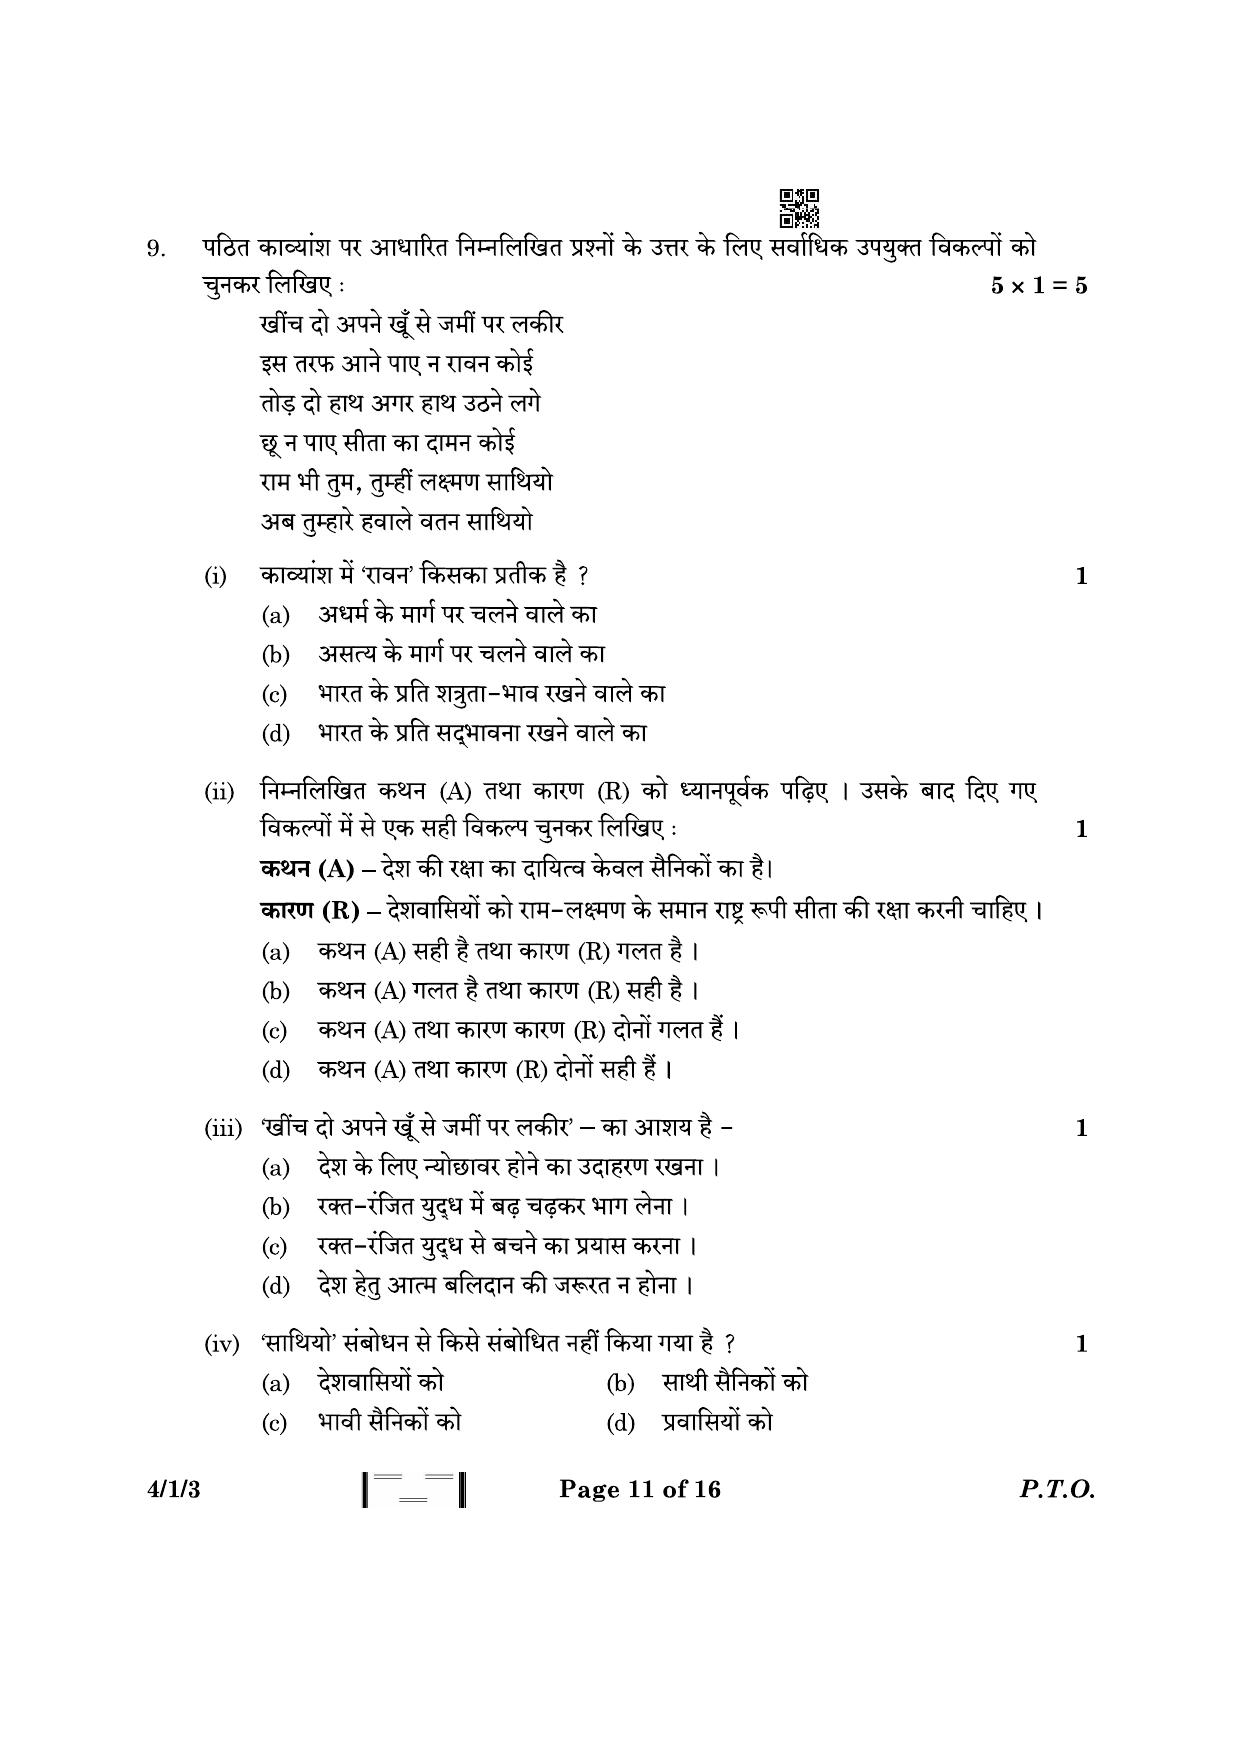 CBSE Class 10 4-1-3 Hindi B 2023 Question Paper - Page 11